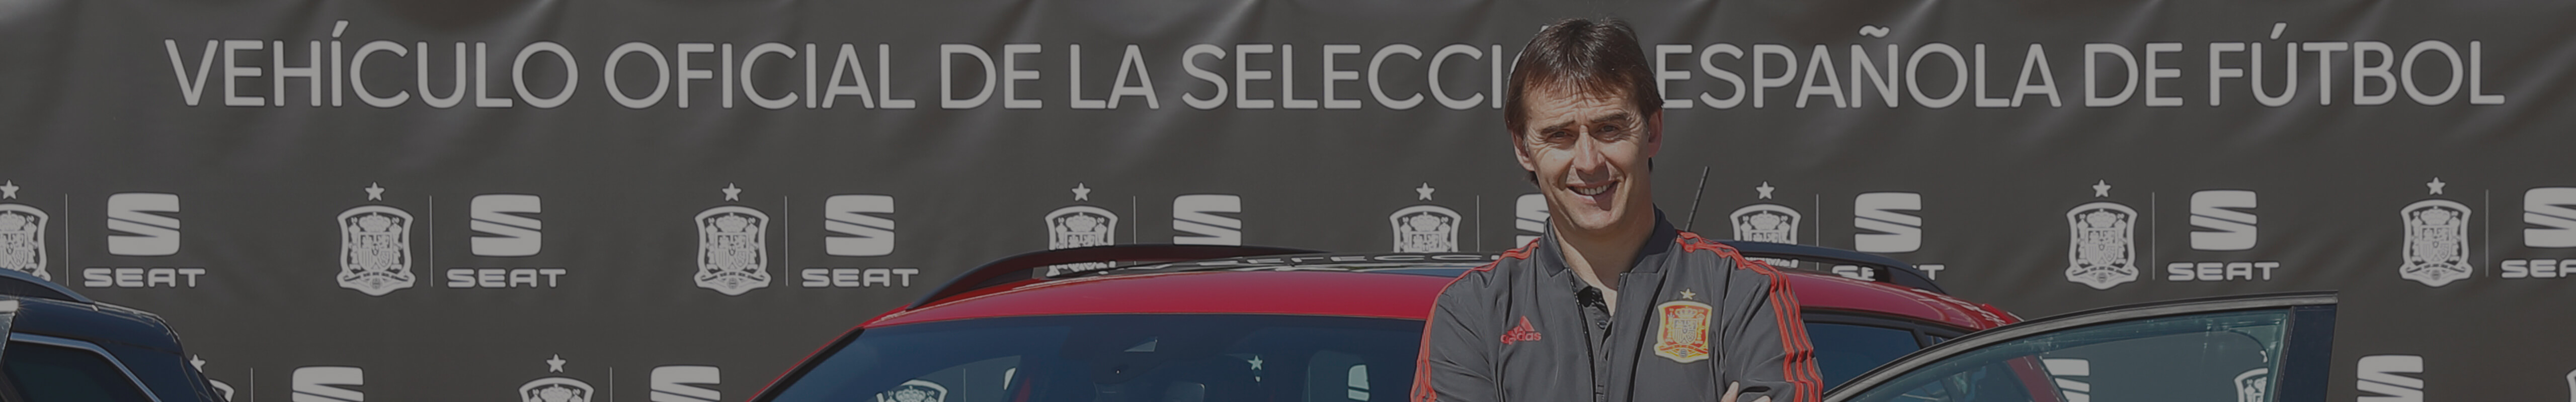 Lopetegui national Spanish team trainer posing with a SEAT Ateca - SEAT Sponsors Spanish National Football Team